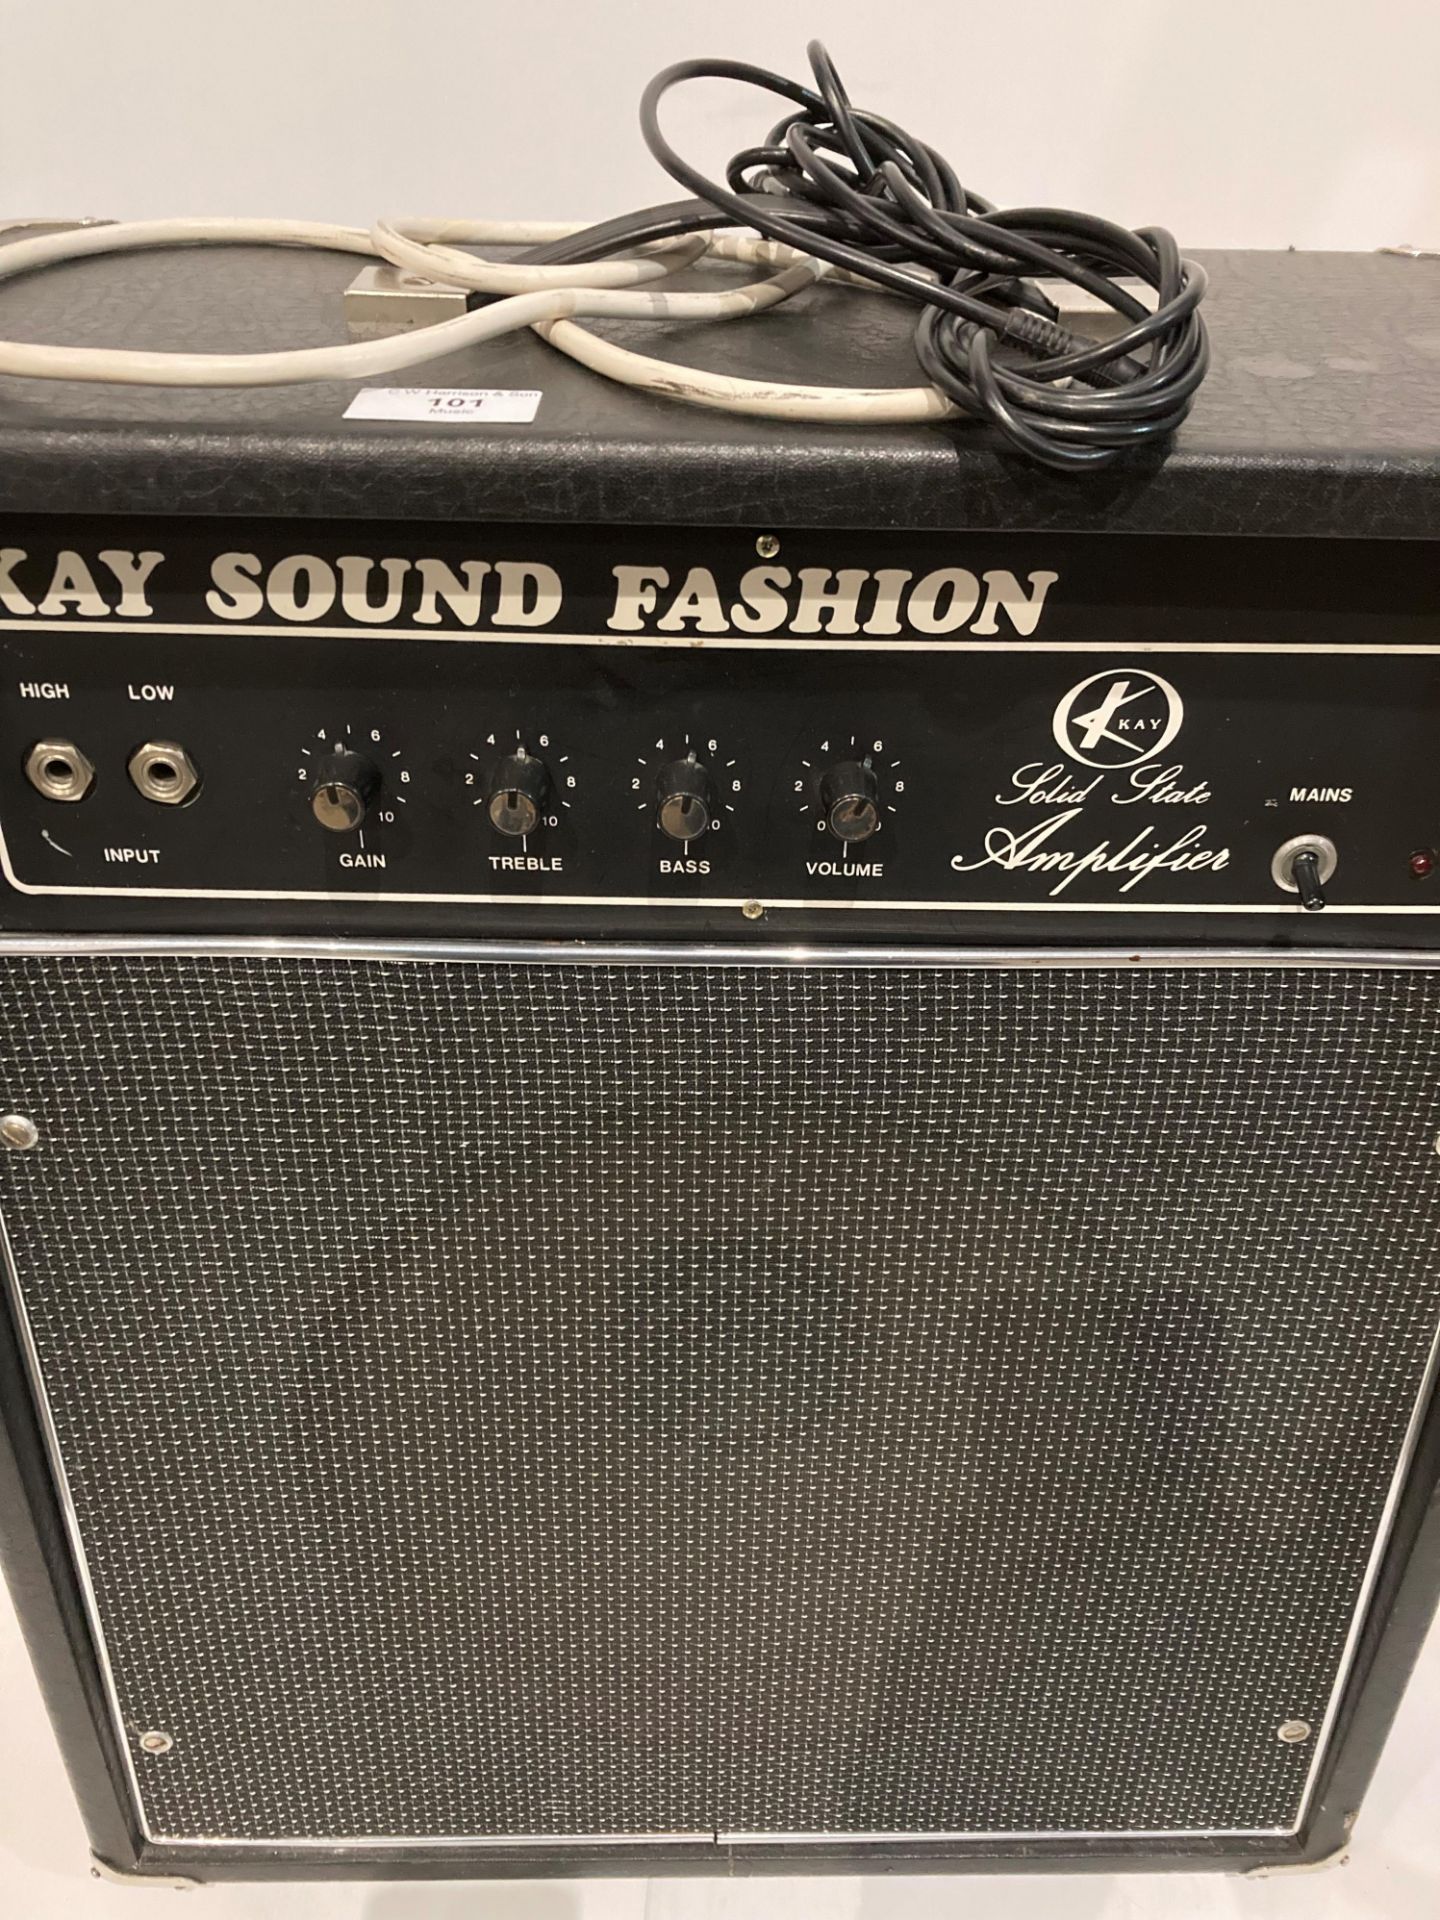 Kay Solid State amplifier by Kay Sound Fashion, - Image 2 of 2